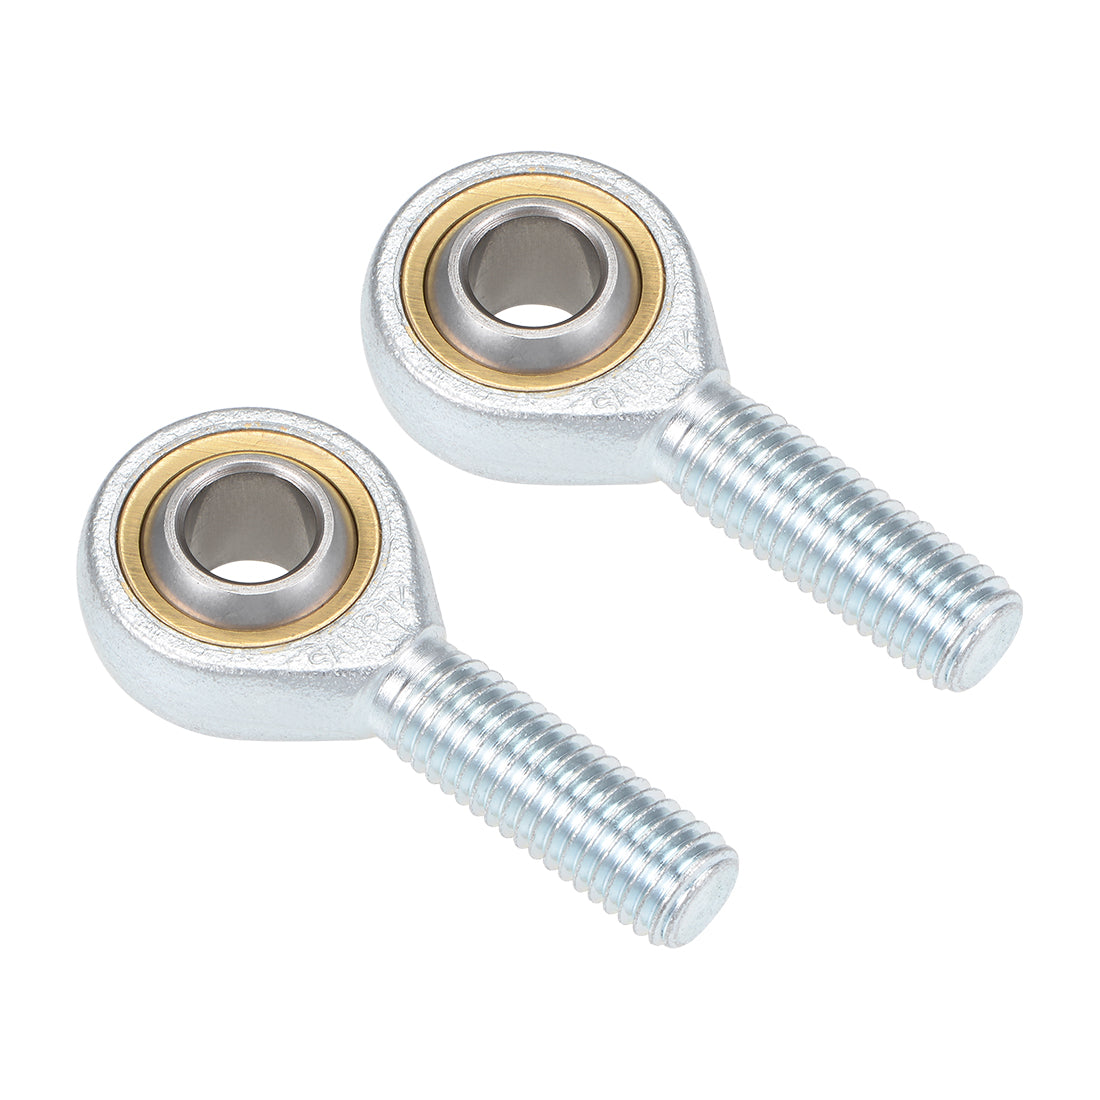 uxcell Uxcell 12mm Rod End Bearing M12x1.75mm Rod Ends Ball Joint Male Left Hand Thread 2pcs